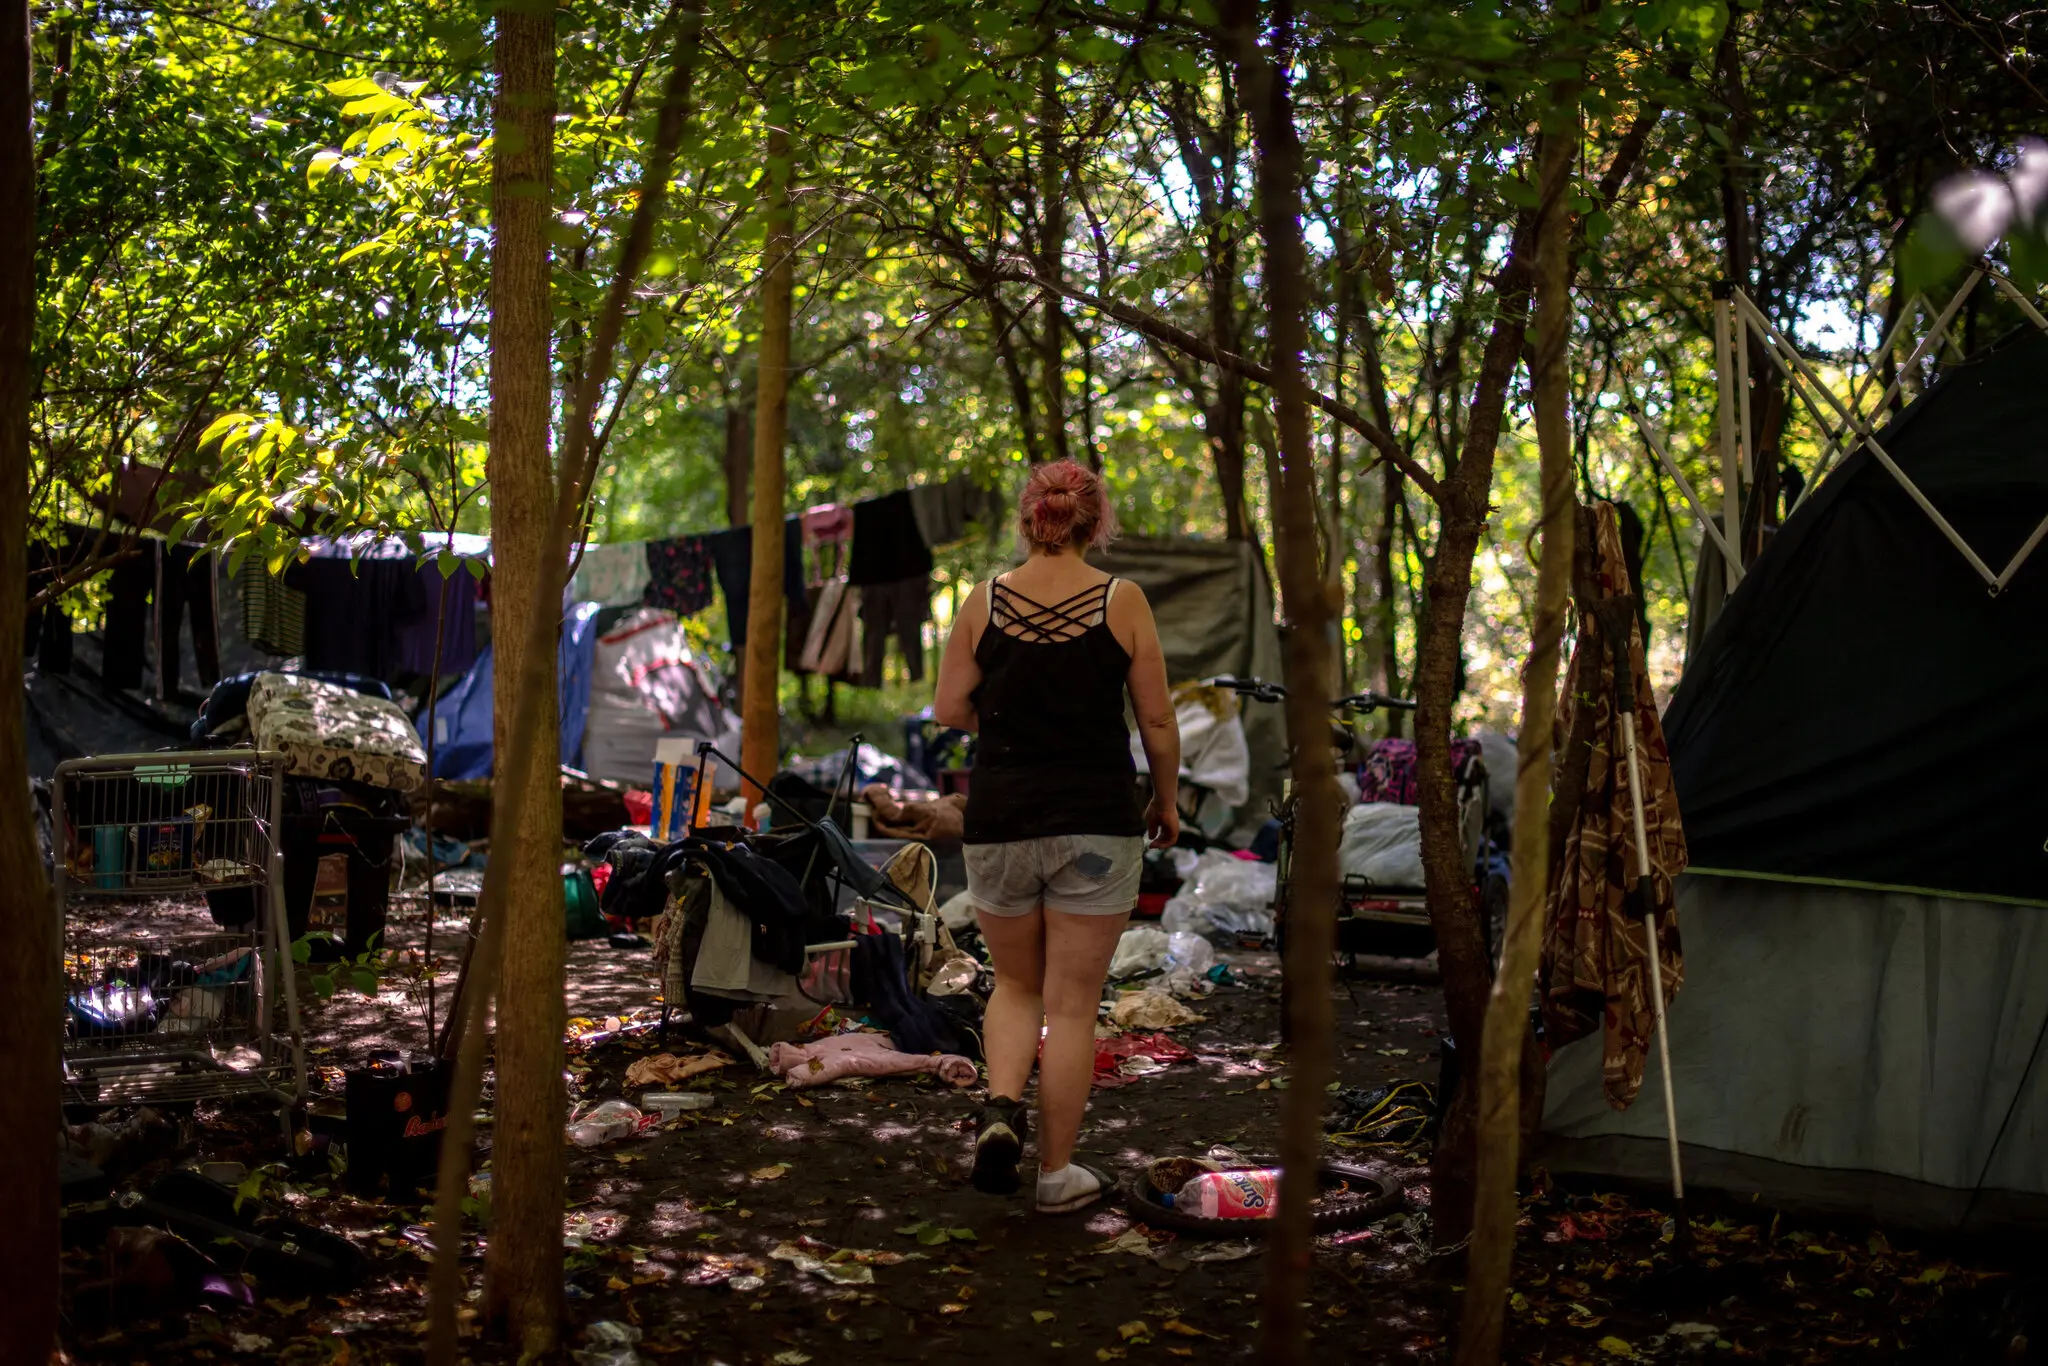 A view of a camp inhabited by people living with drug addiction. Belongings are strewn about the forest floor and a tent is set up at right. a woman, her back to the camera, limps along among the belongings, wearing a spaghetti-strap shirt, shorts, and her hair is dyed silvery lavender. Photo: Hilary Swift / The New York Times